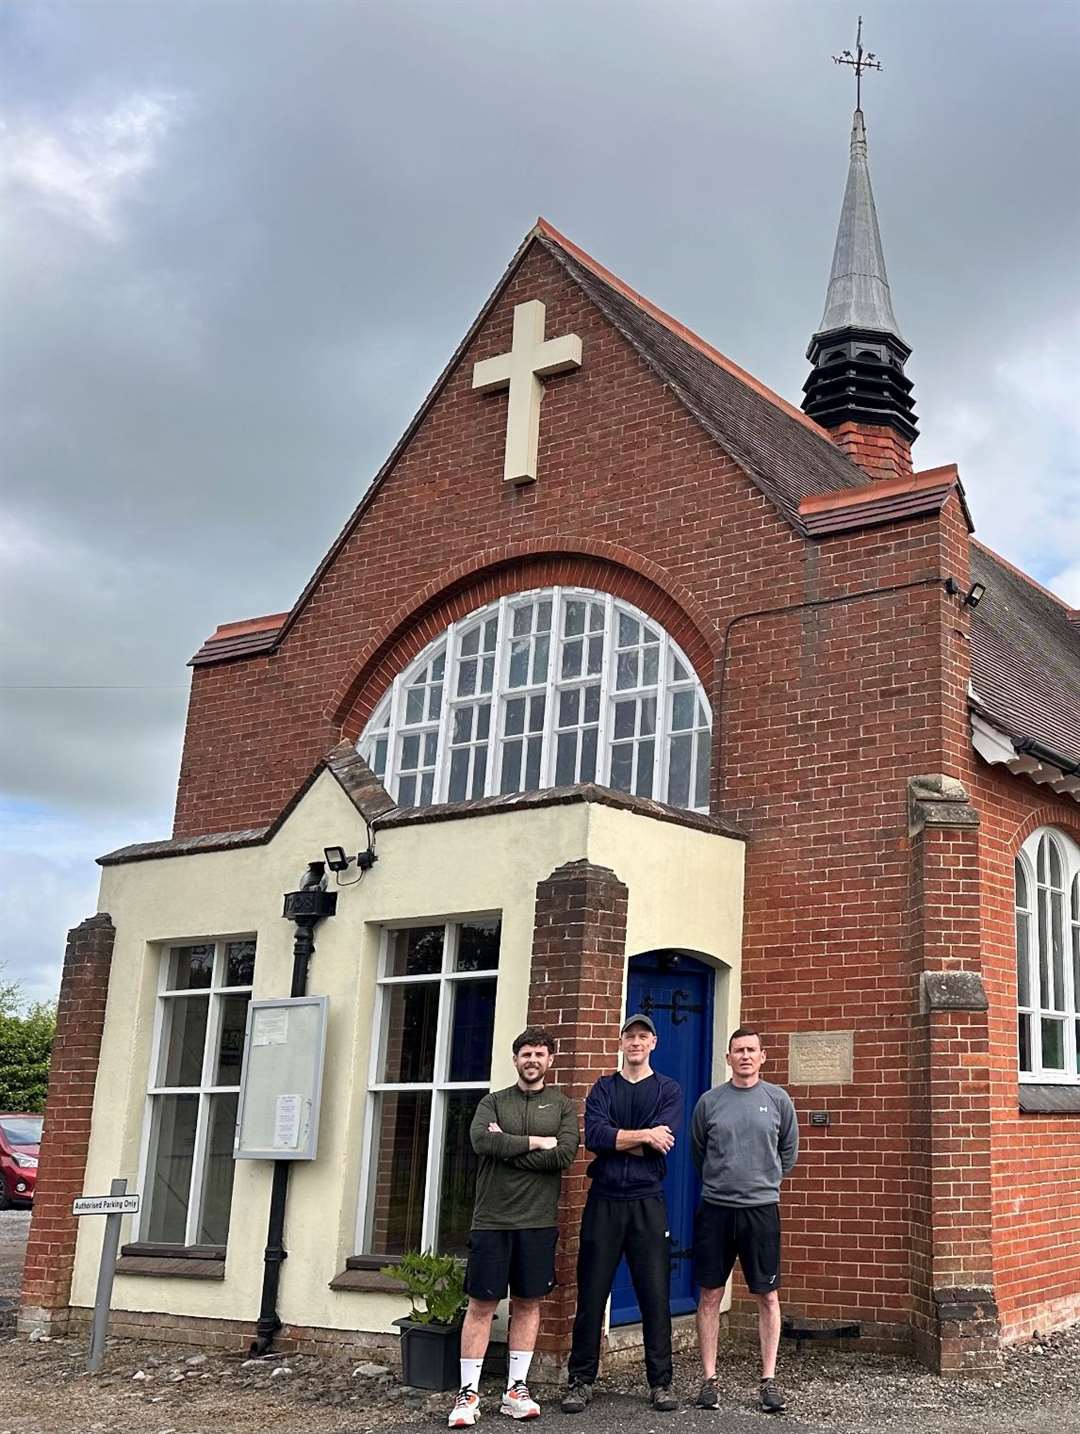 A new community gym has opened in Capel United Church in Five Oak Green